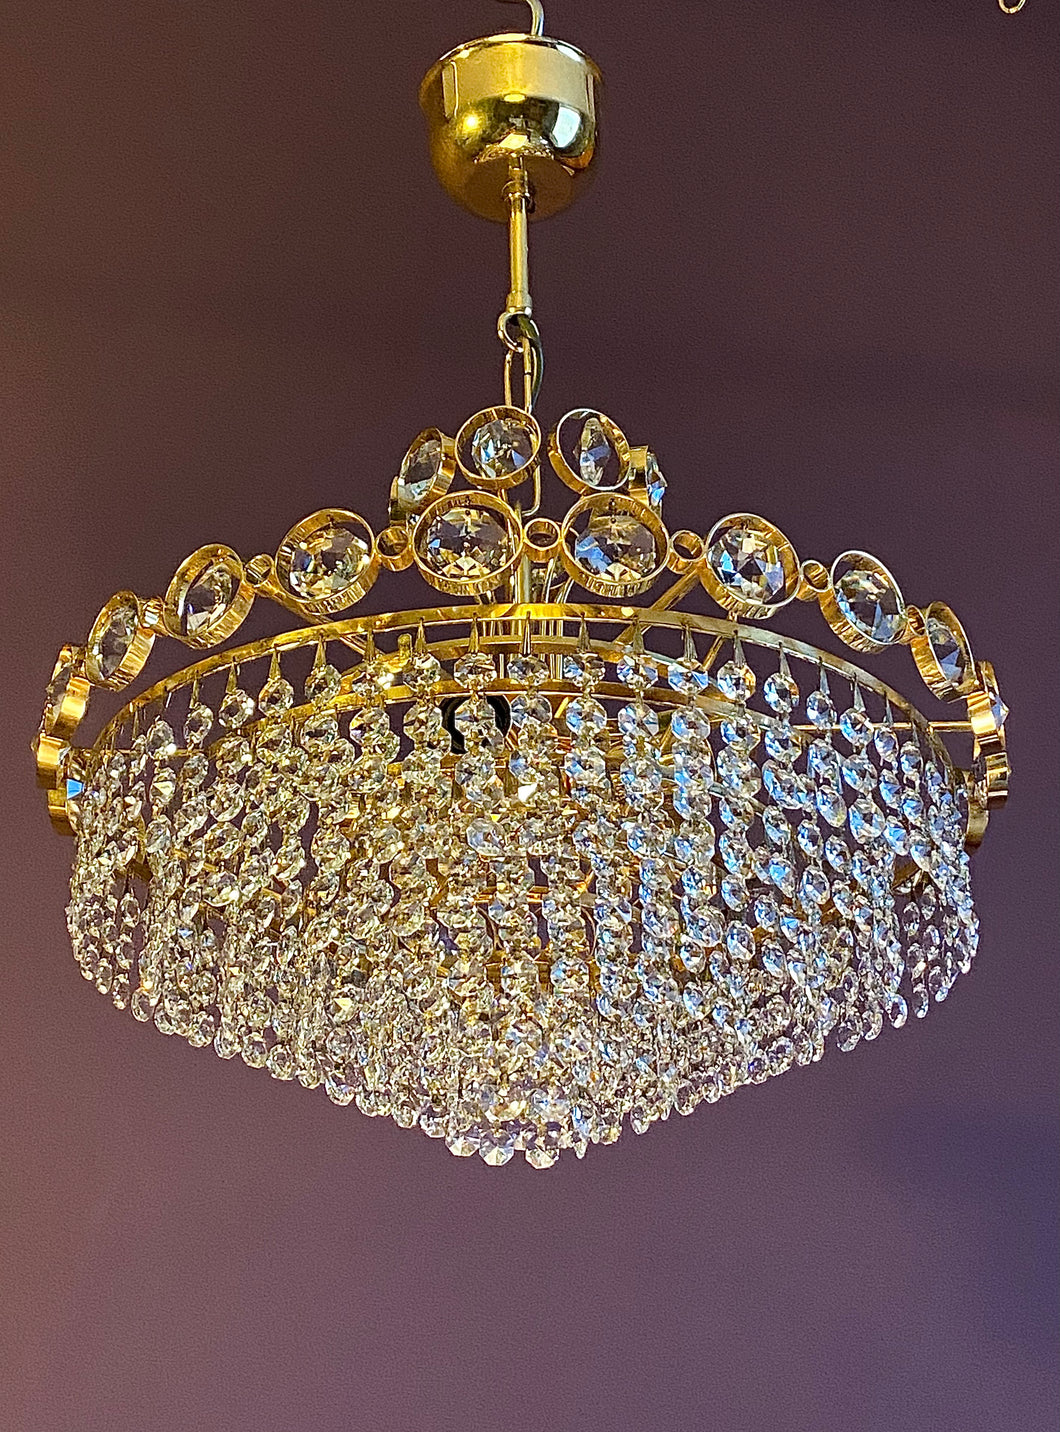 SOLD Vintage Chandelier with a Retro Vibe.